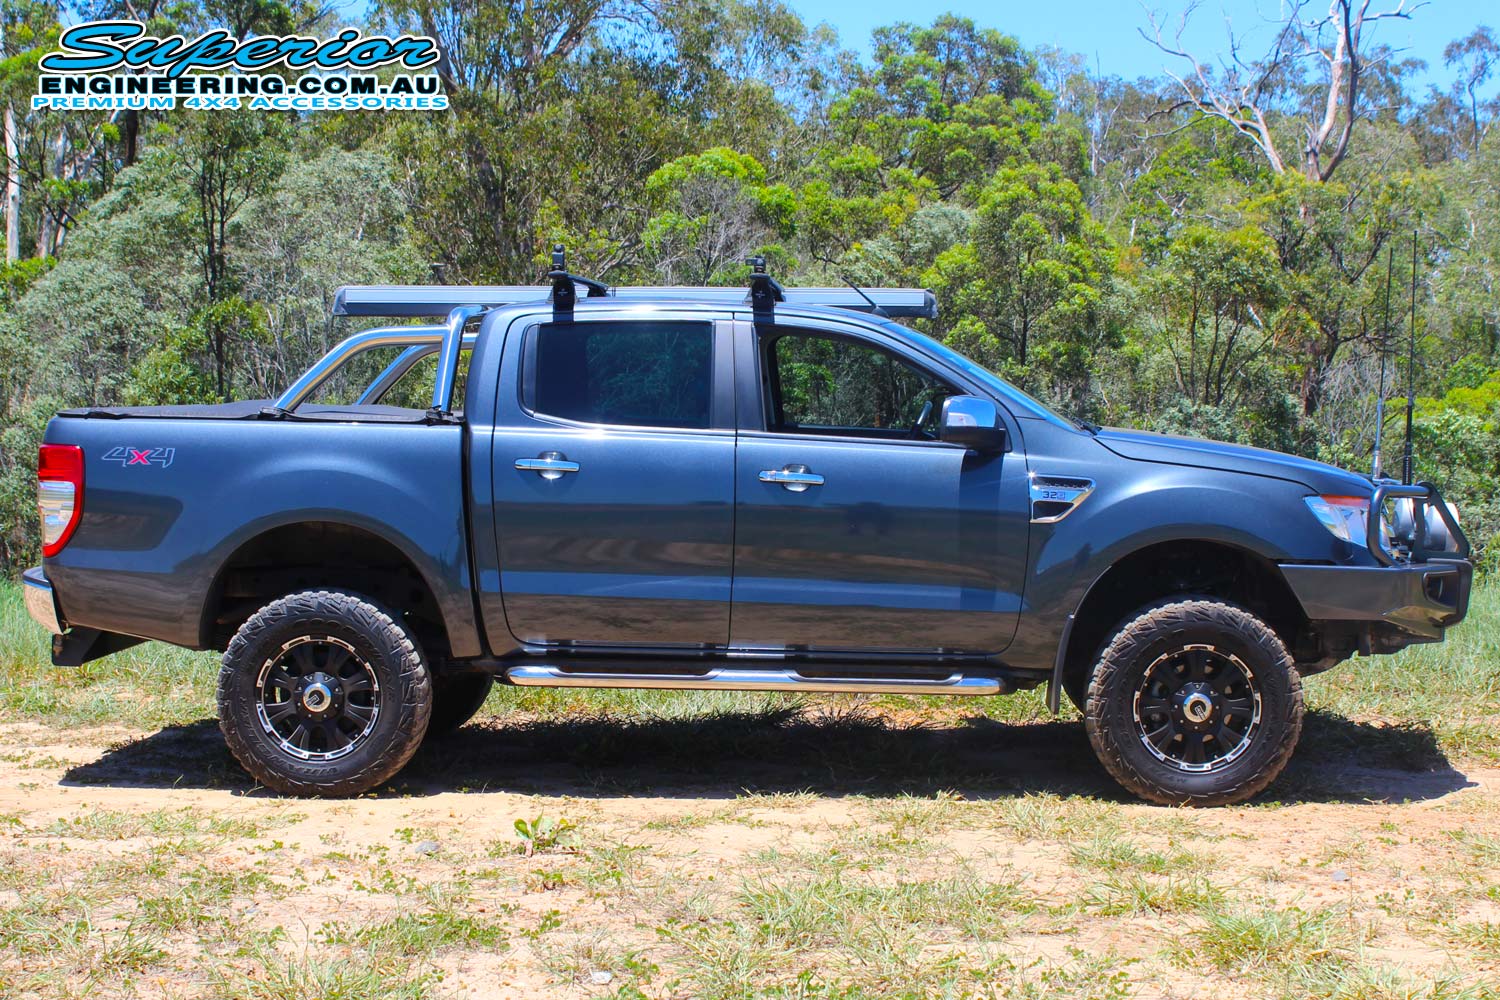 Right side view of a Ford PX Ranger after being fitted with a 2 inch Bilstein and EFS Lift Kit by Superior Engineering